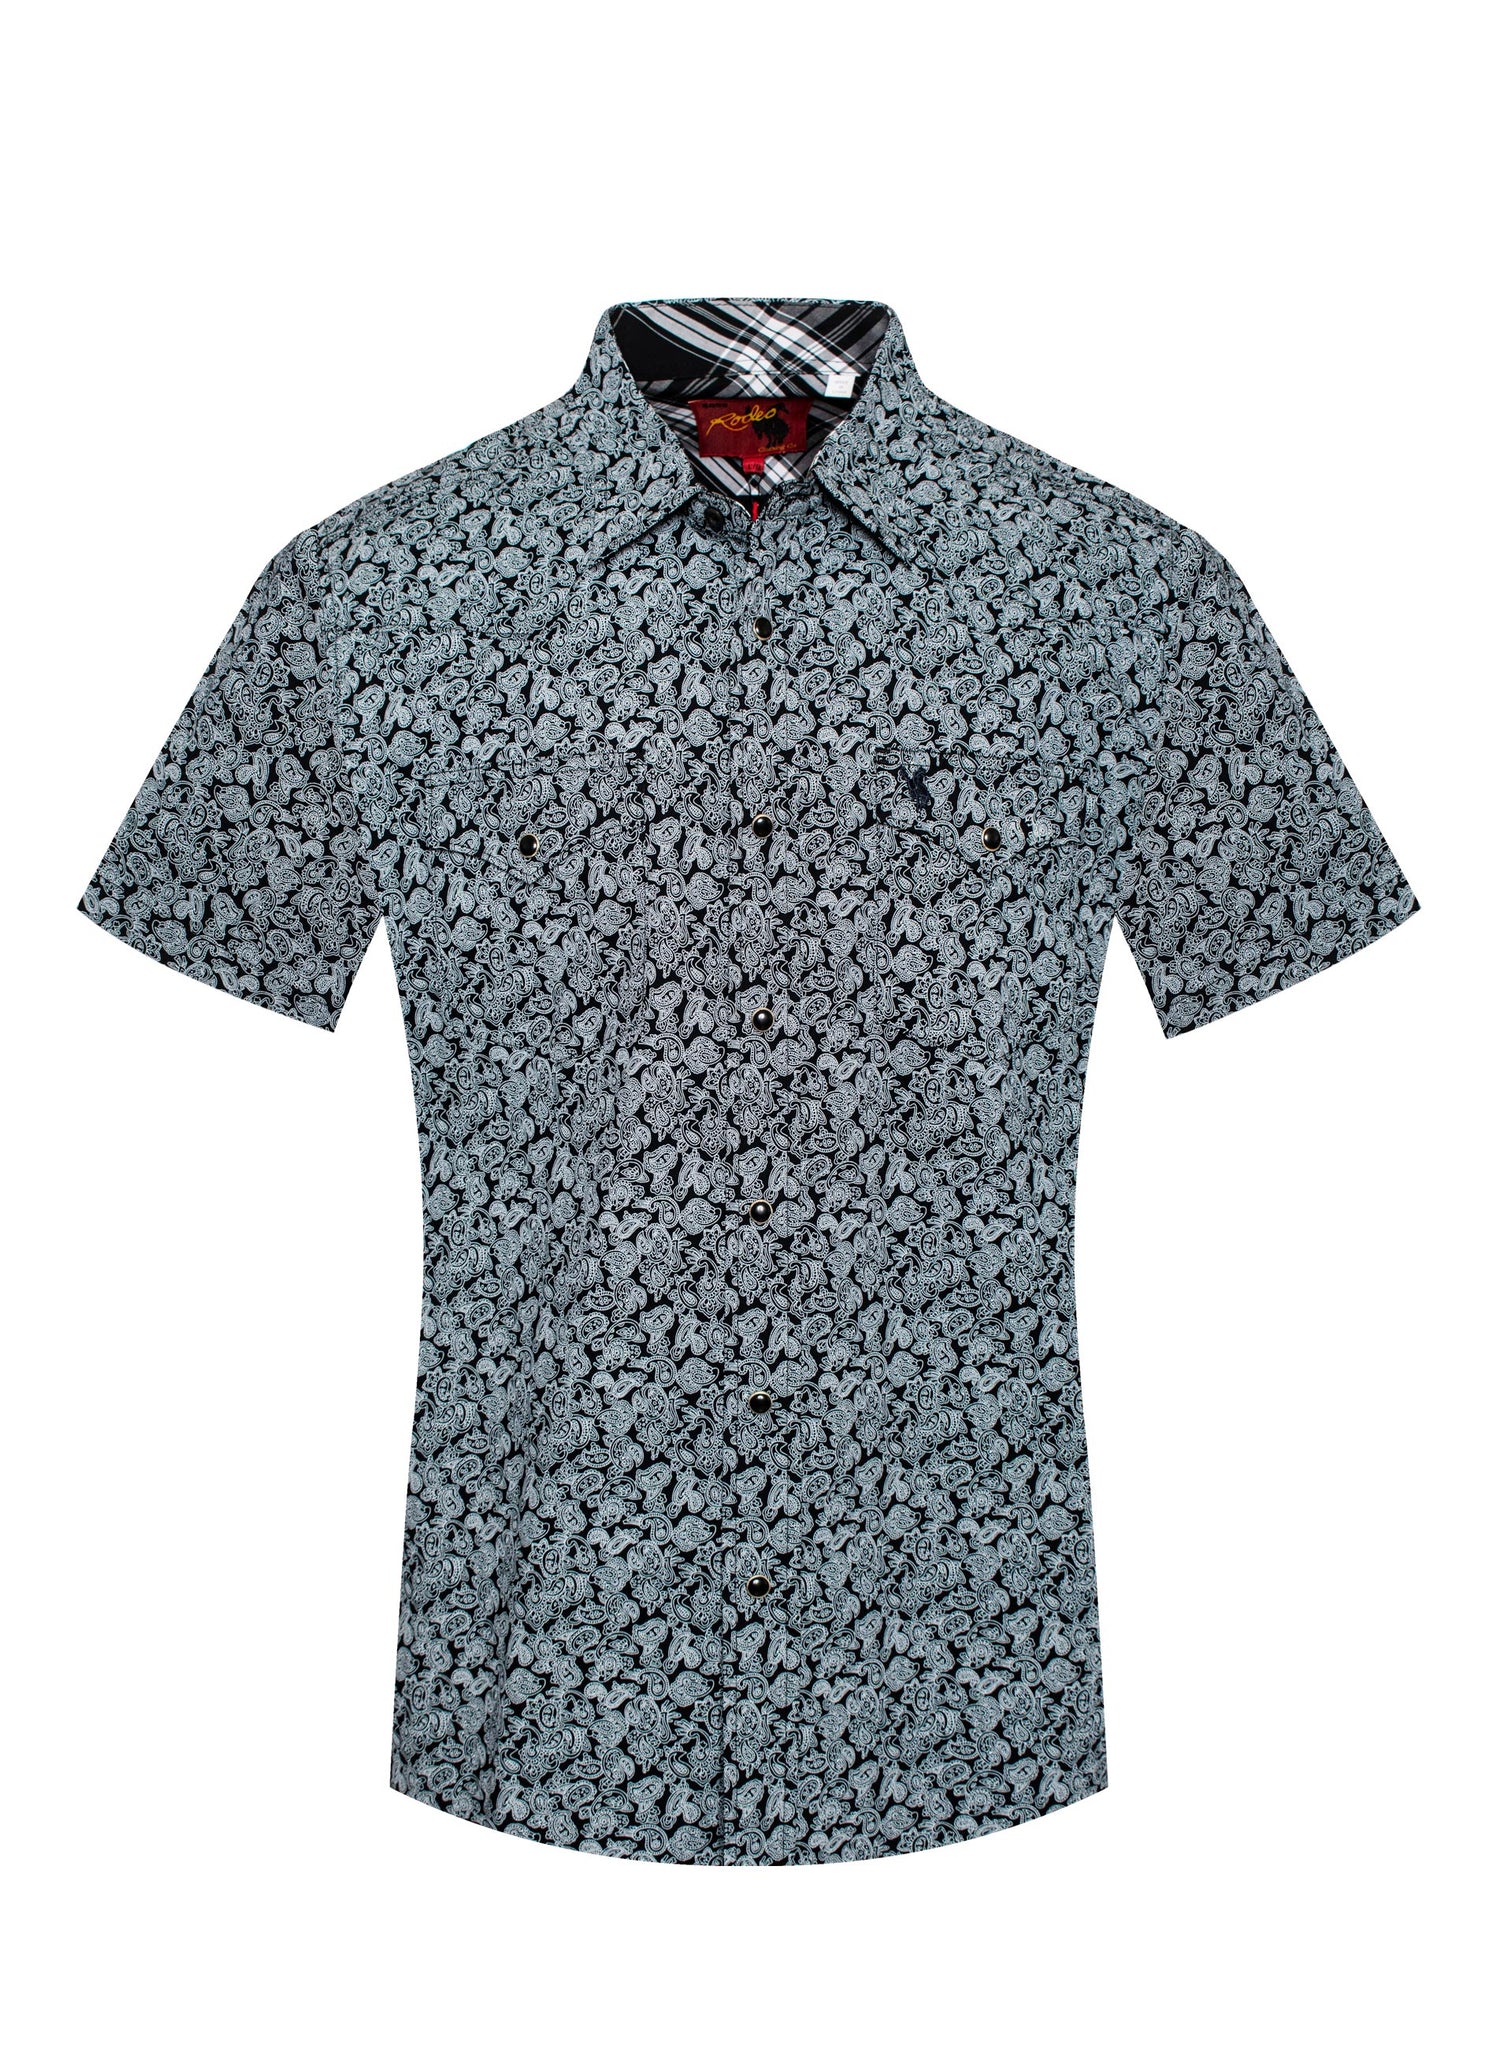 Men's Western Print Shirts With Snap Buttons